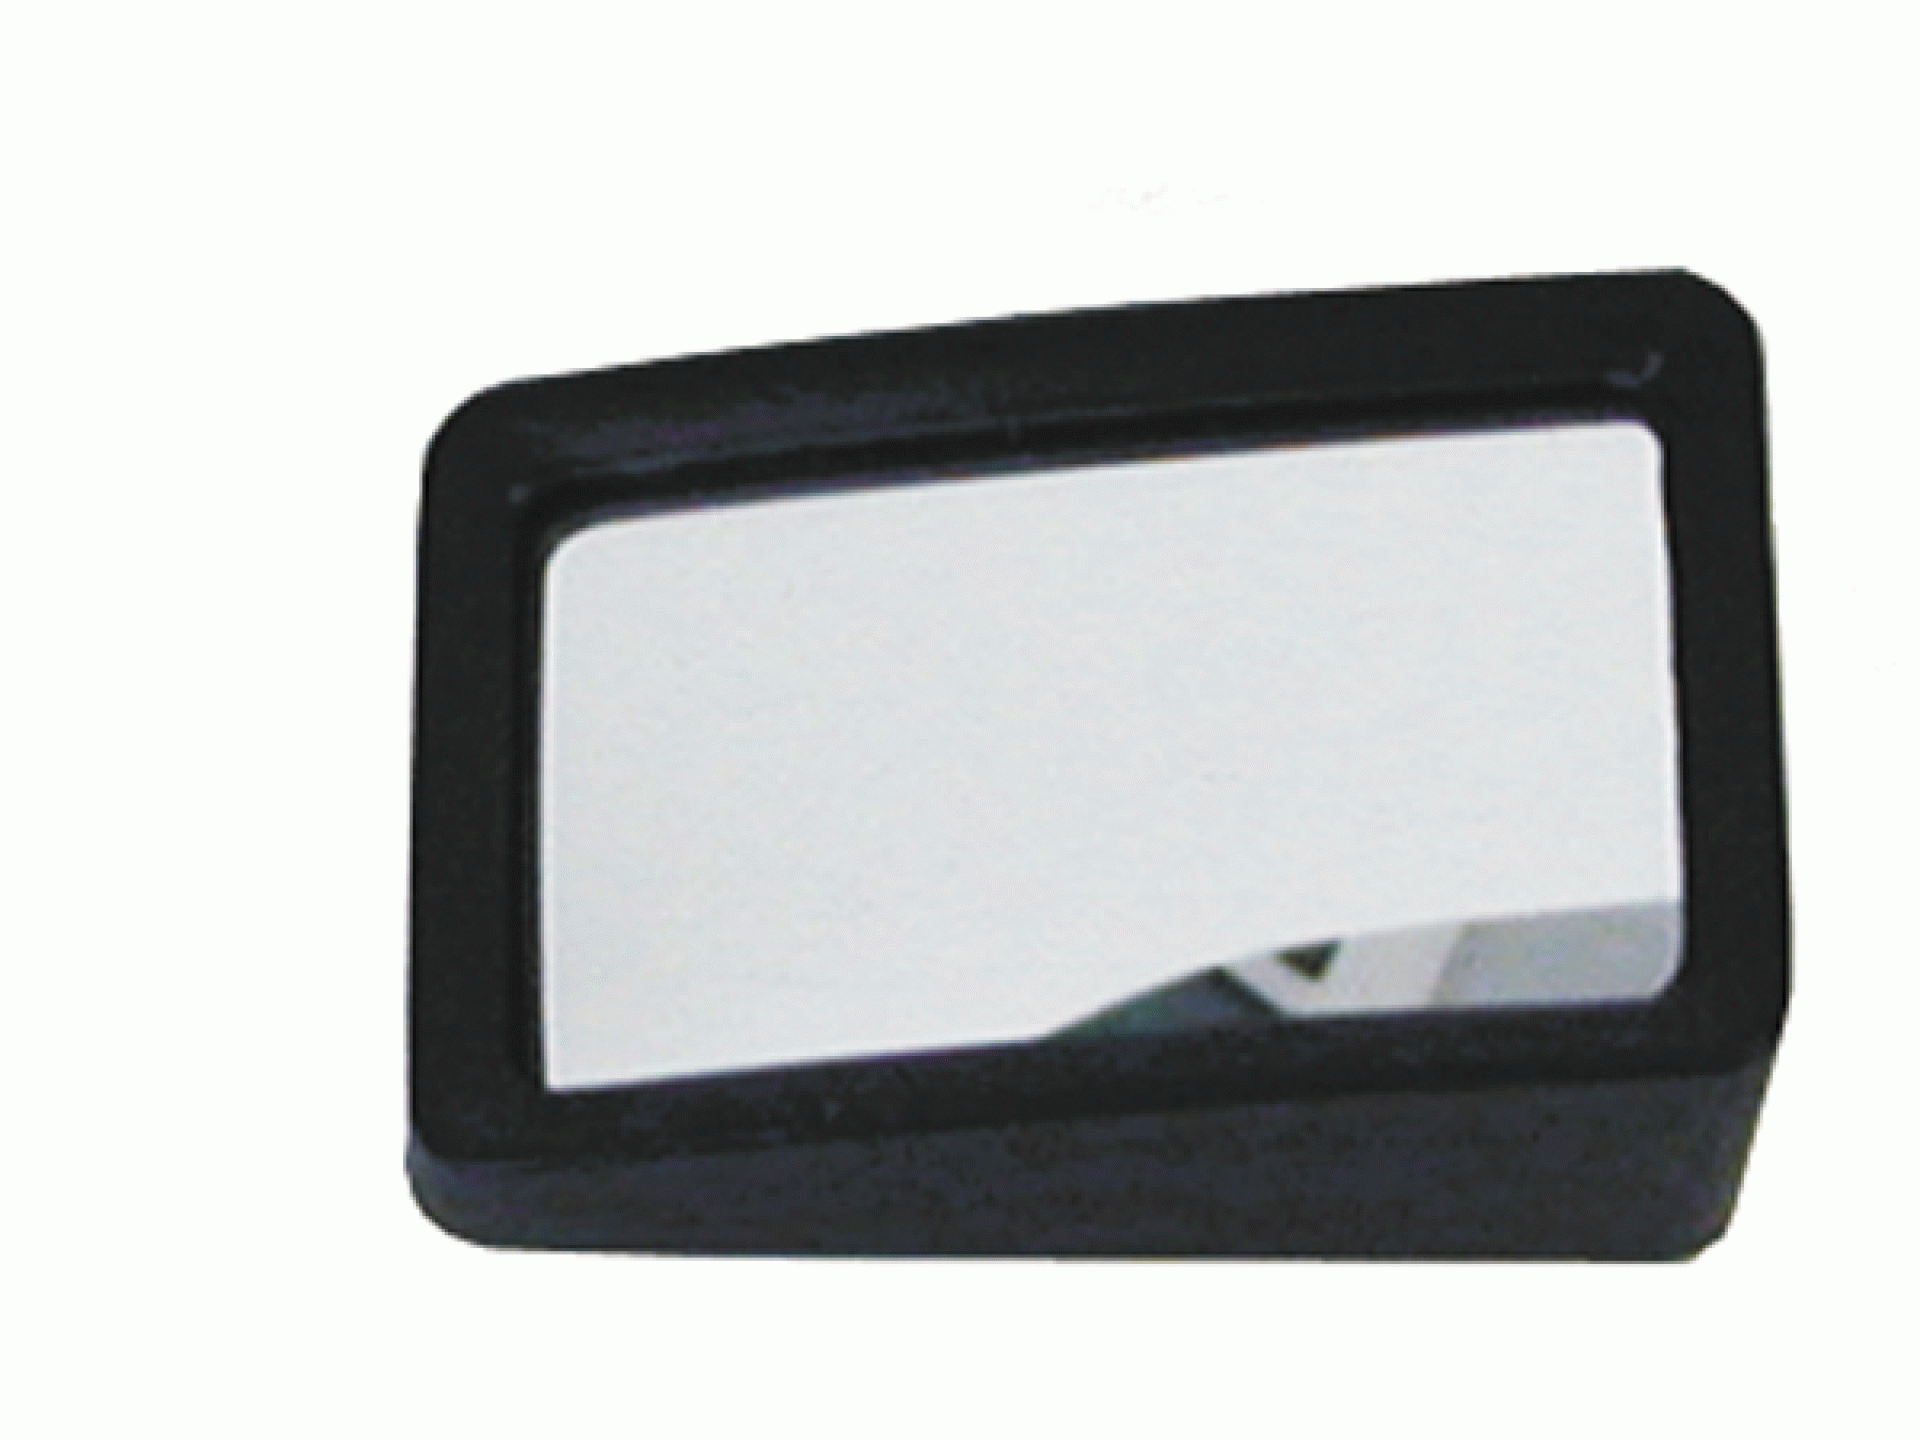 PRIME PRODUCTS | 30-0005 | WEDGE MIRROR GLASS 2-1/4" X 1-1/2" CONVEX BLIND SPOT